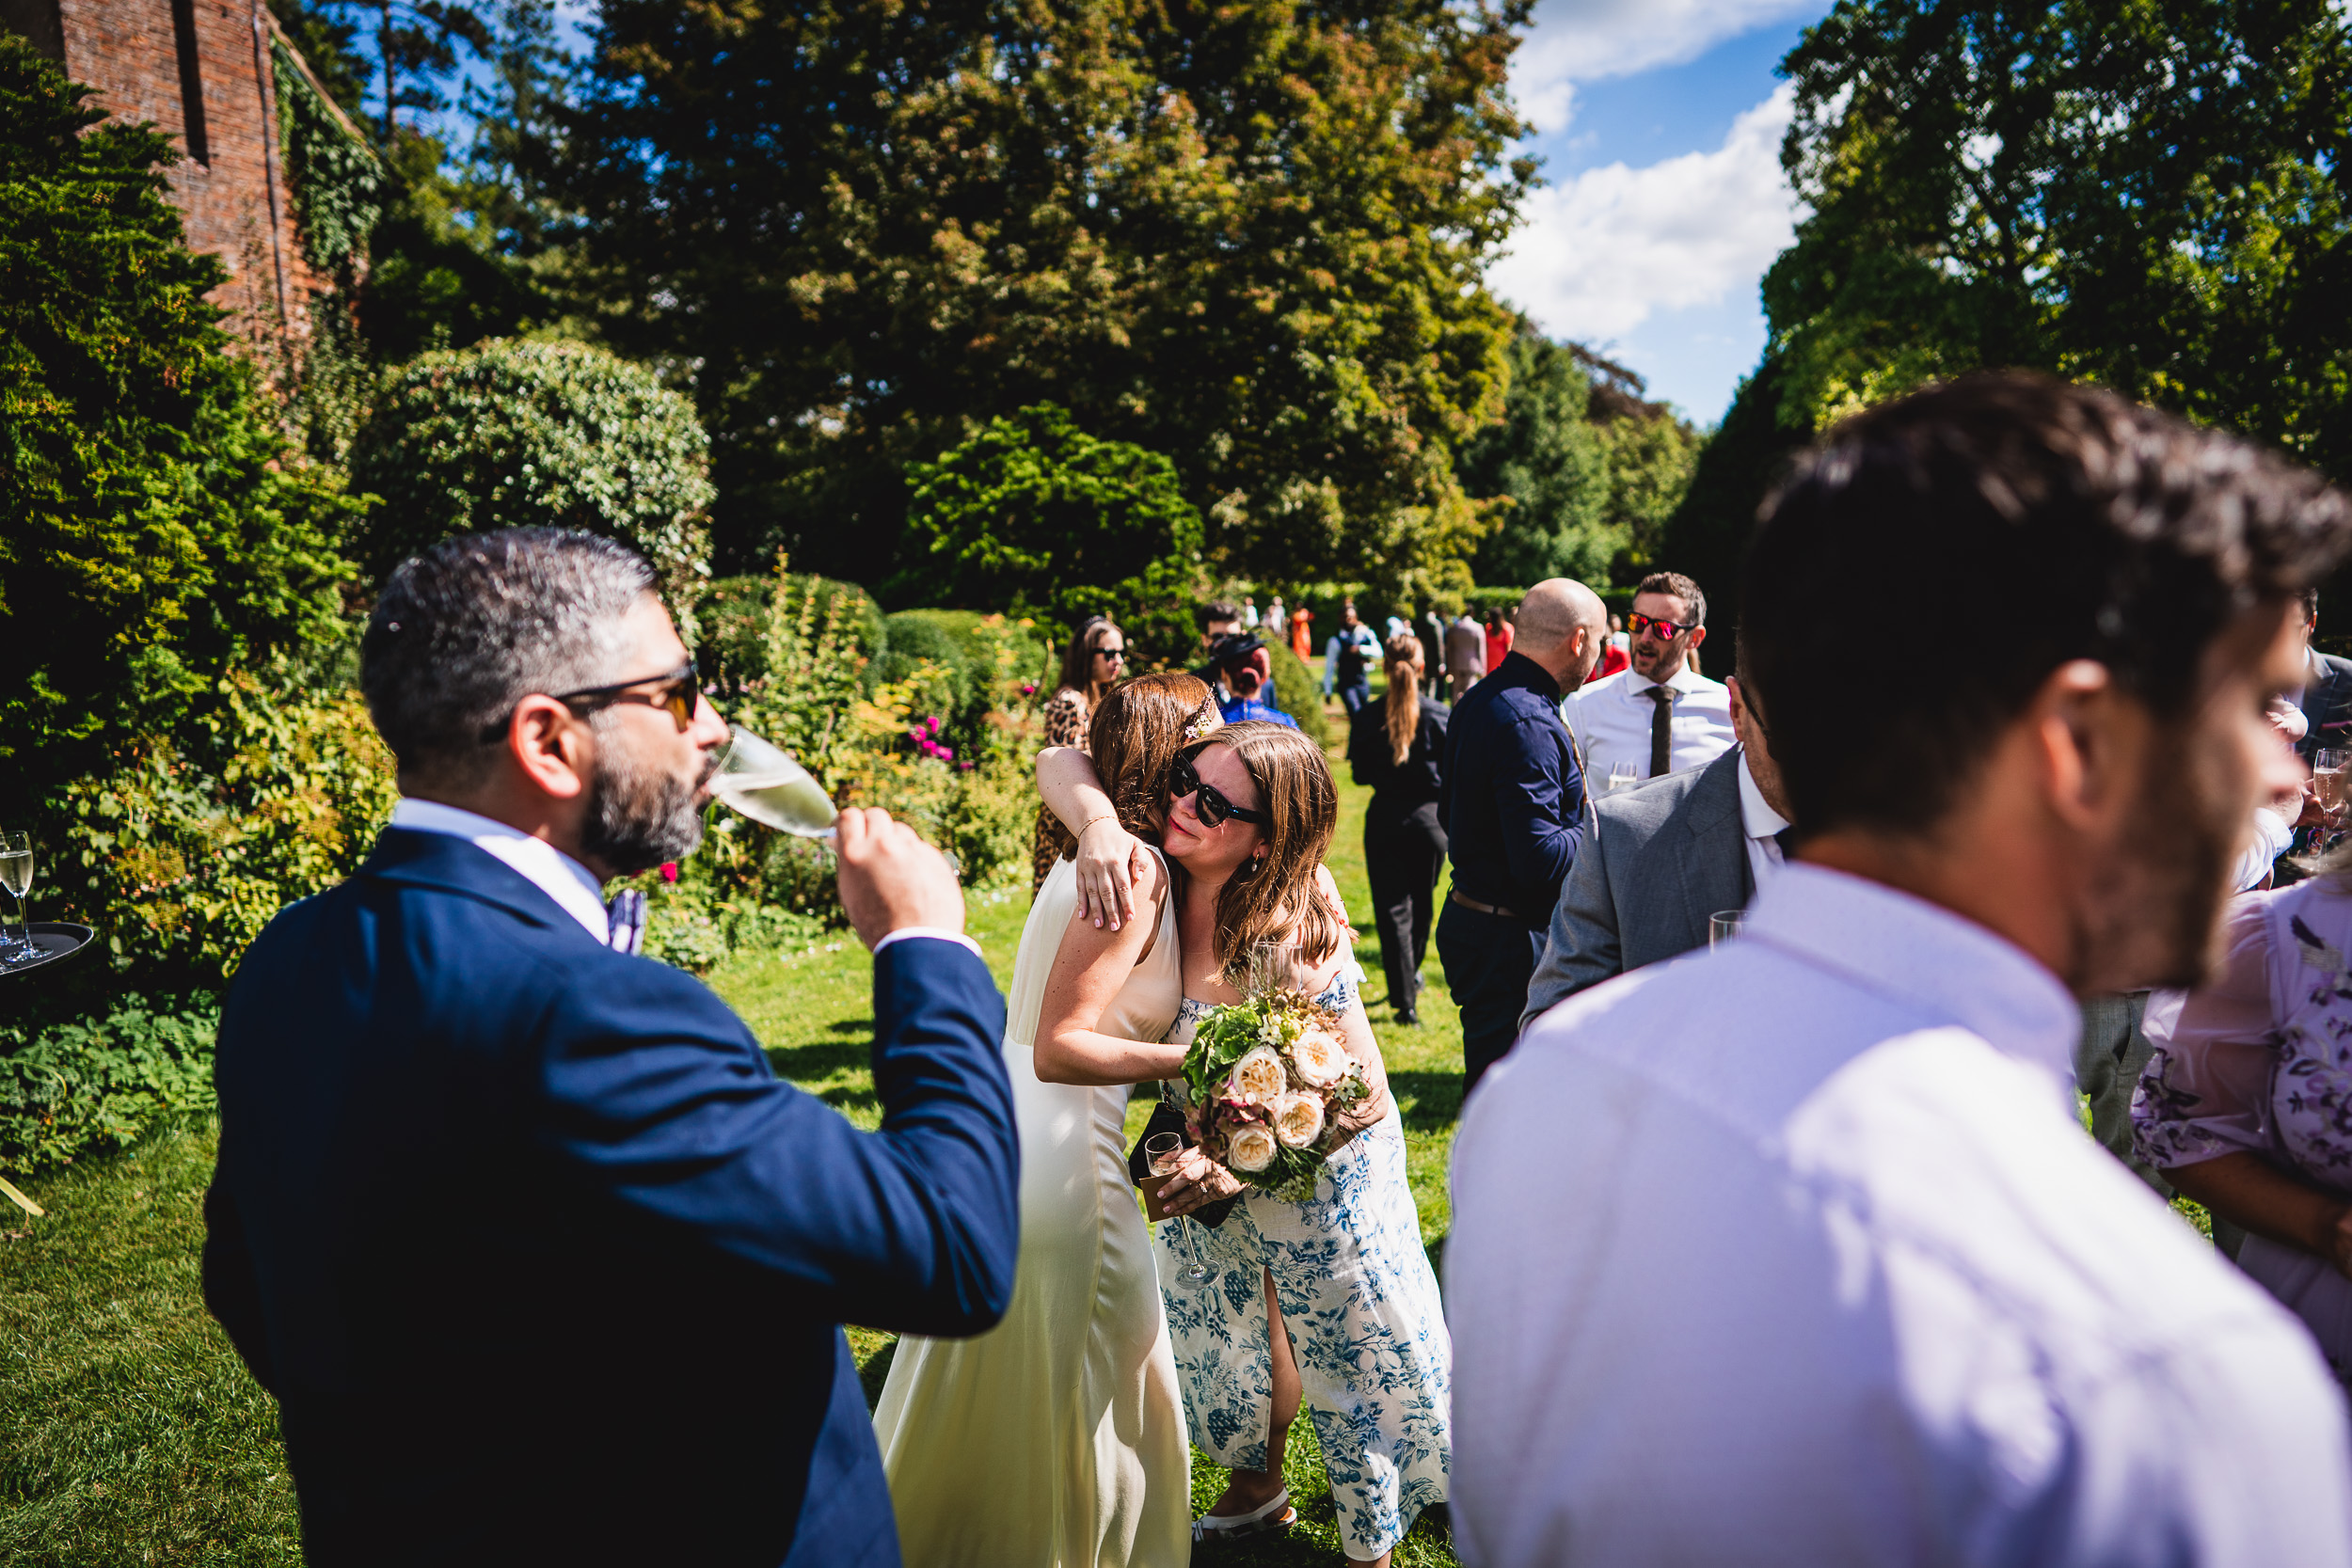 A Surrey Wedding party in a garden at Ridge Farm featuring a beautiful bride and groom.